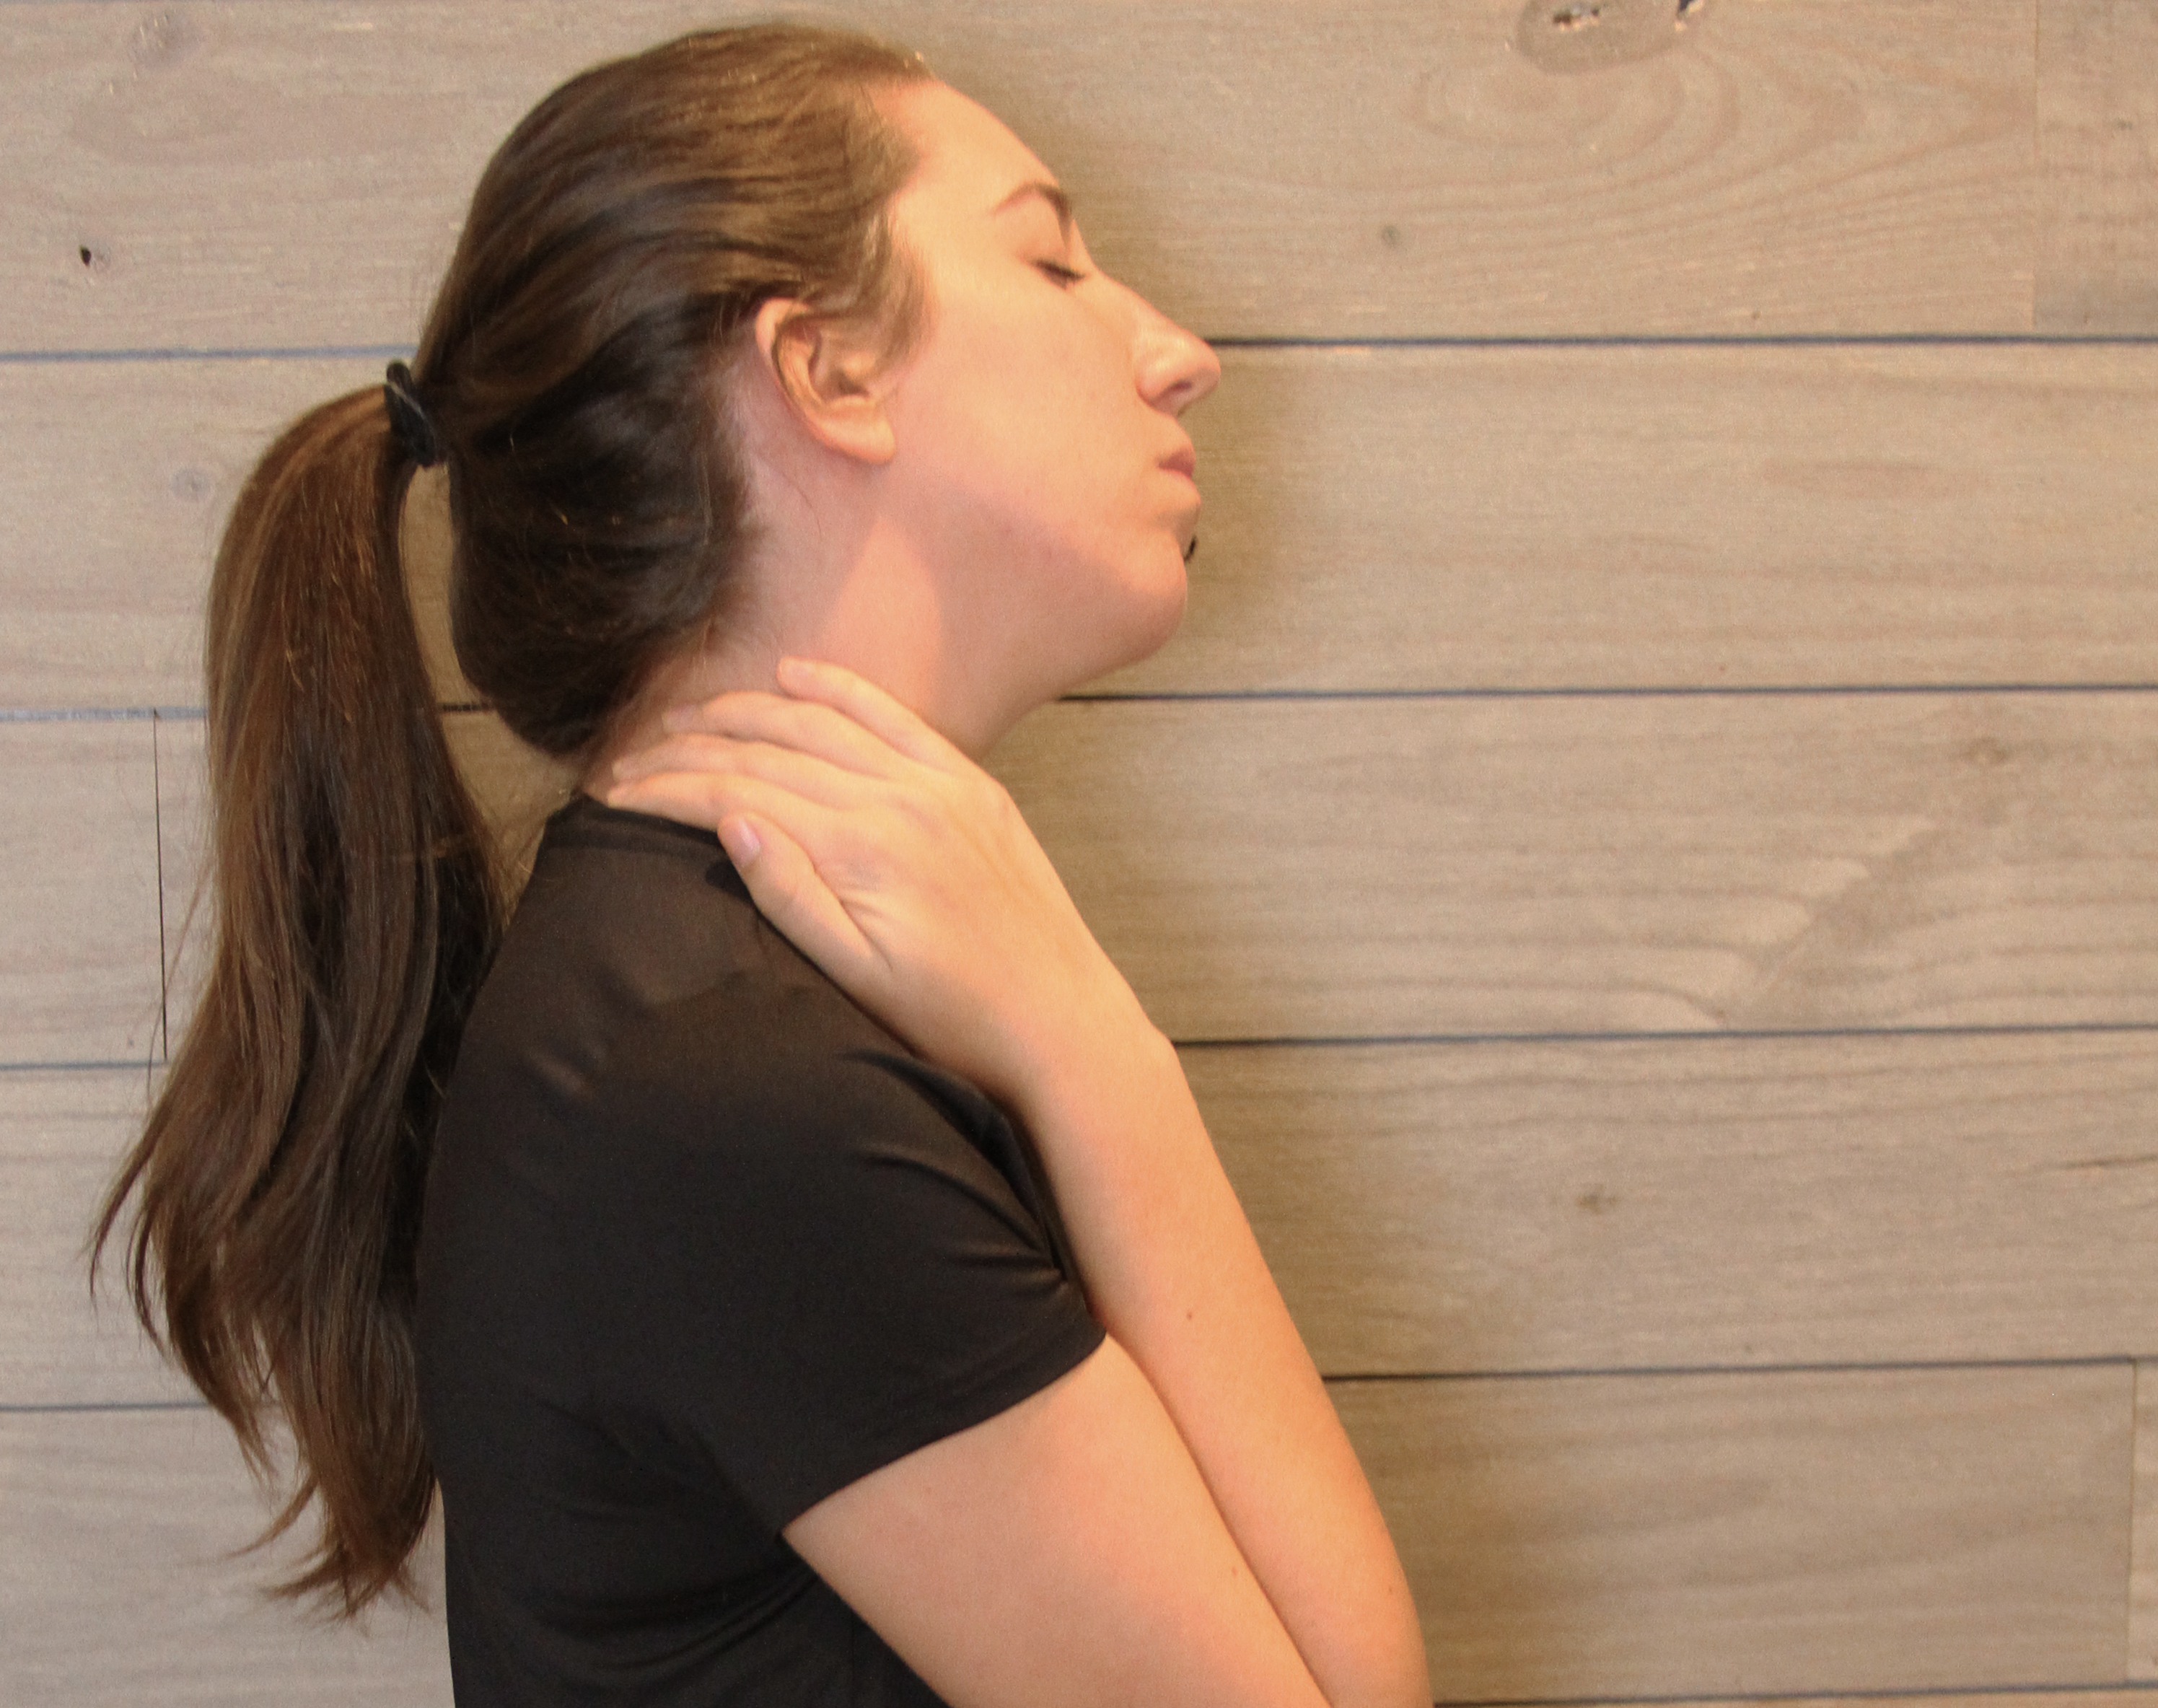 Therapeutic Massage: Restoring Balance and Relieving Pain